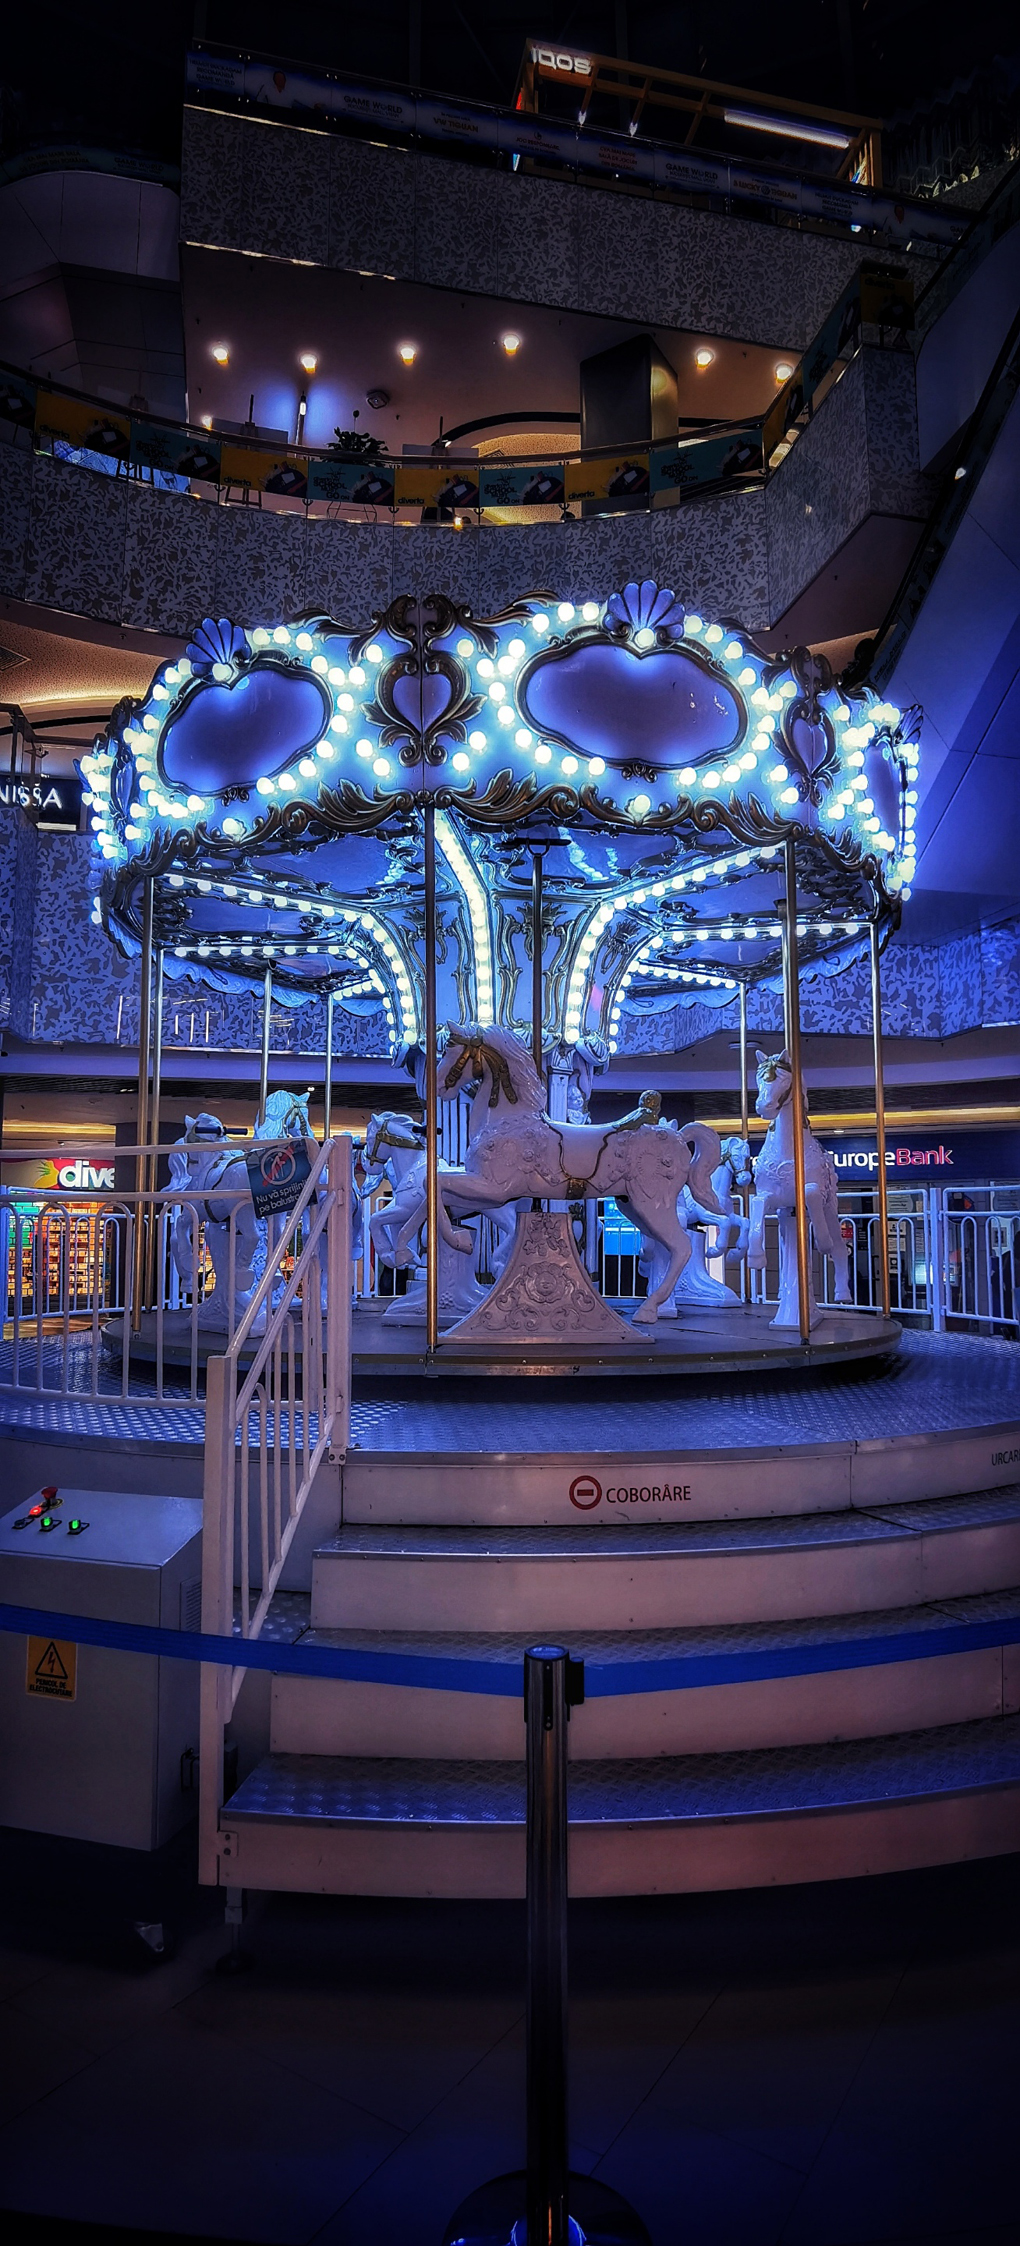 Carousel of horses with lights